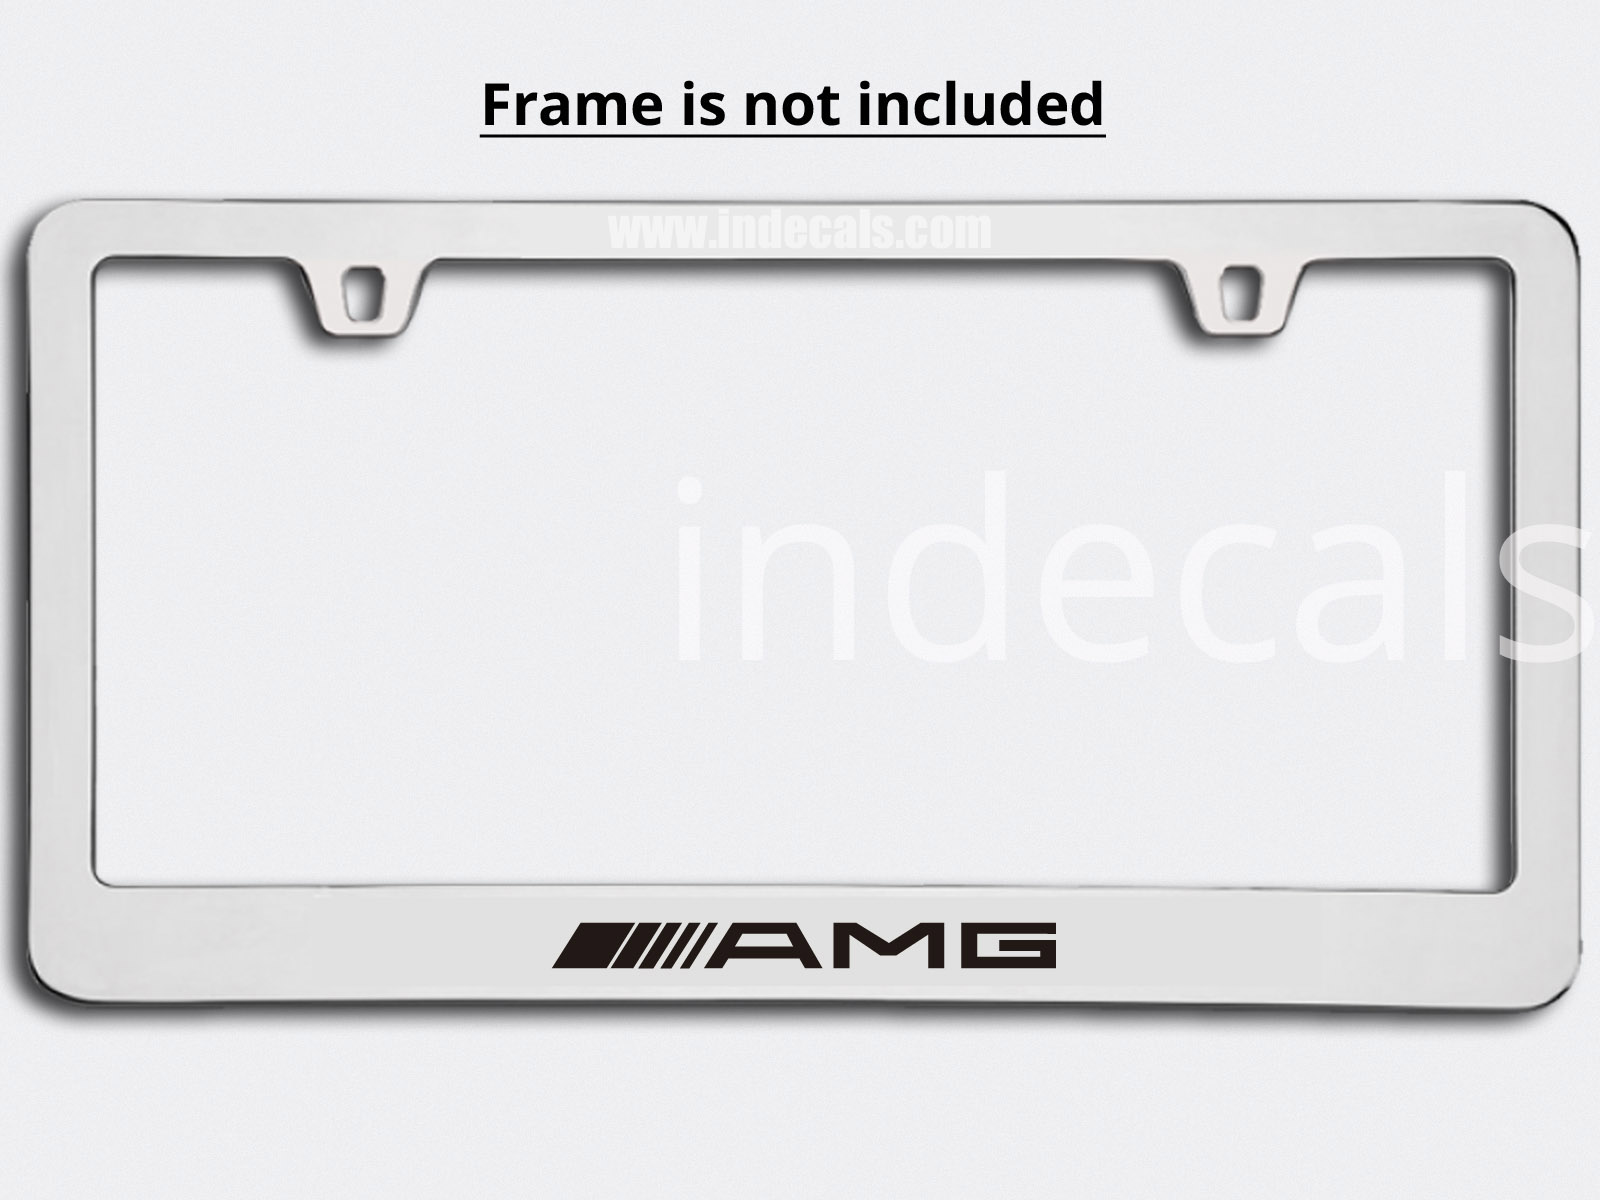 3 x AMG Stickers for Plate Frame - Black